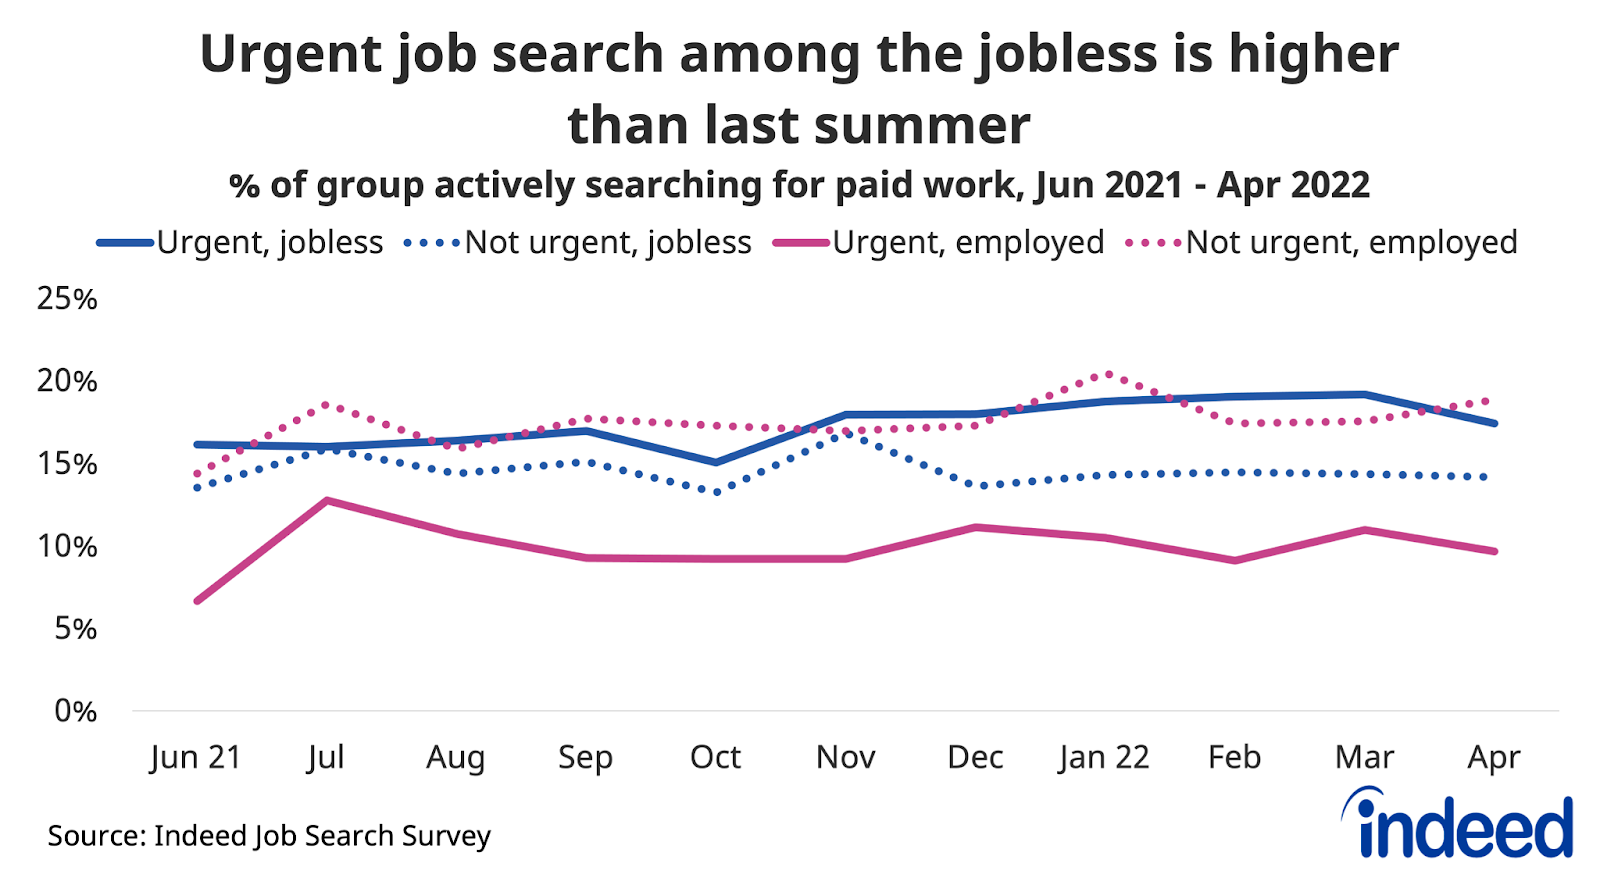 Line graph titled “Urgent job search among the jobless is higher than last summer” 